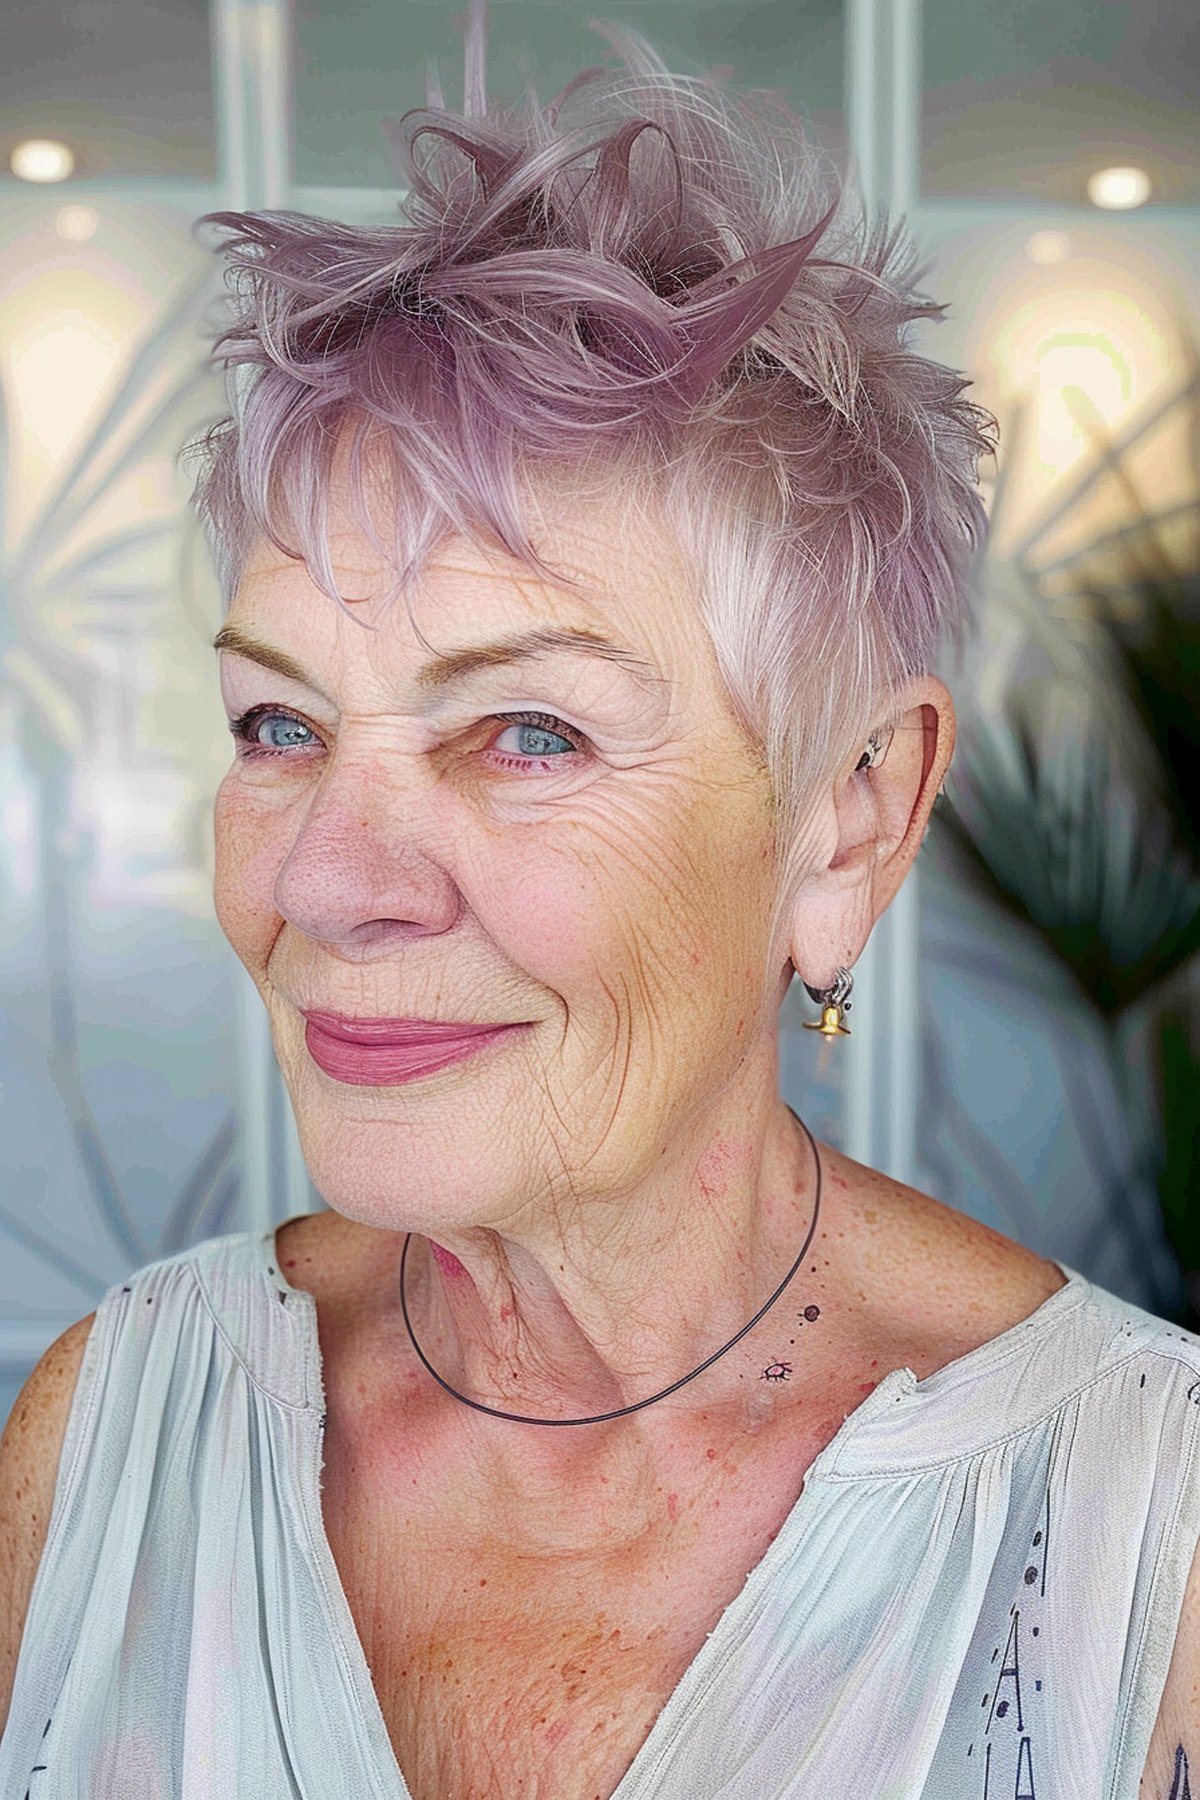 Metallic pink spiky pixie hairstyle for a woman in her 70s with fine hair